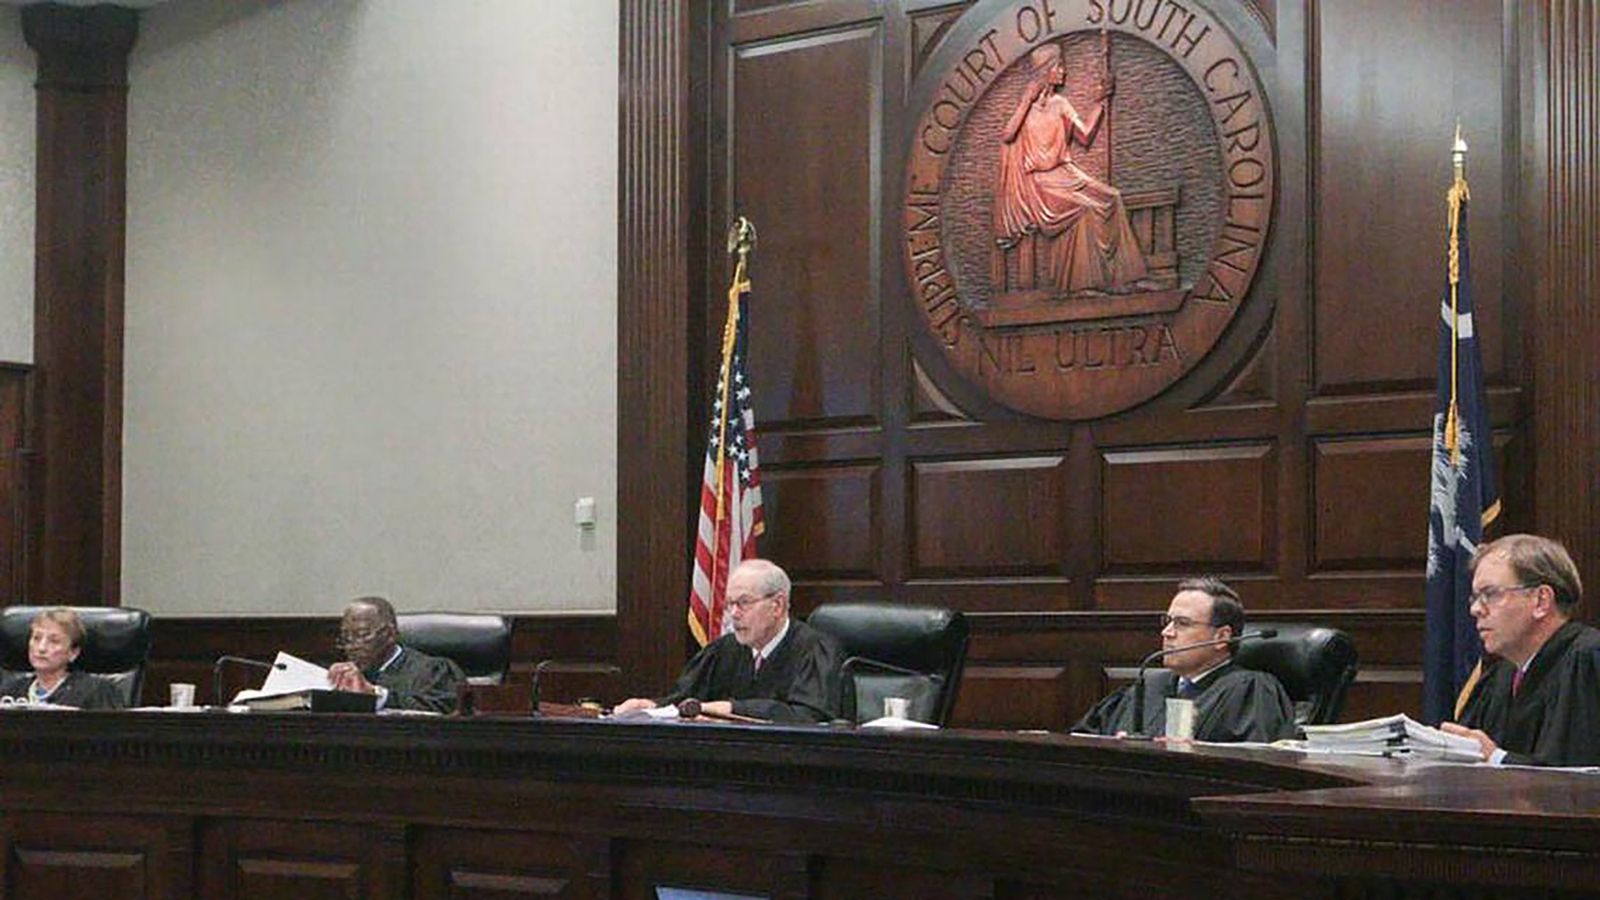 South Carolina s all male Supreme Court upholds 6 week abortion ban